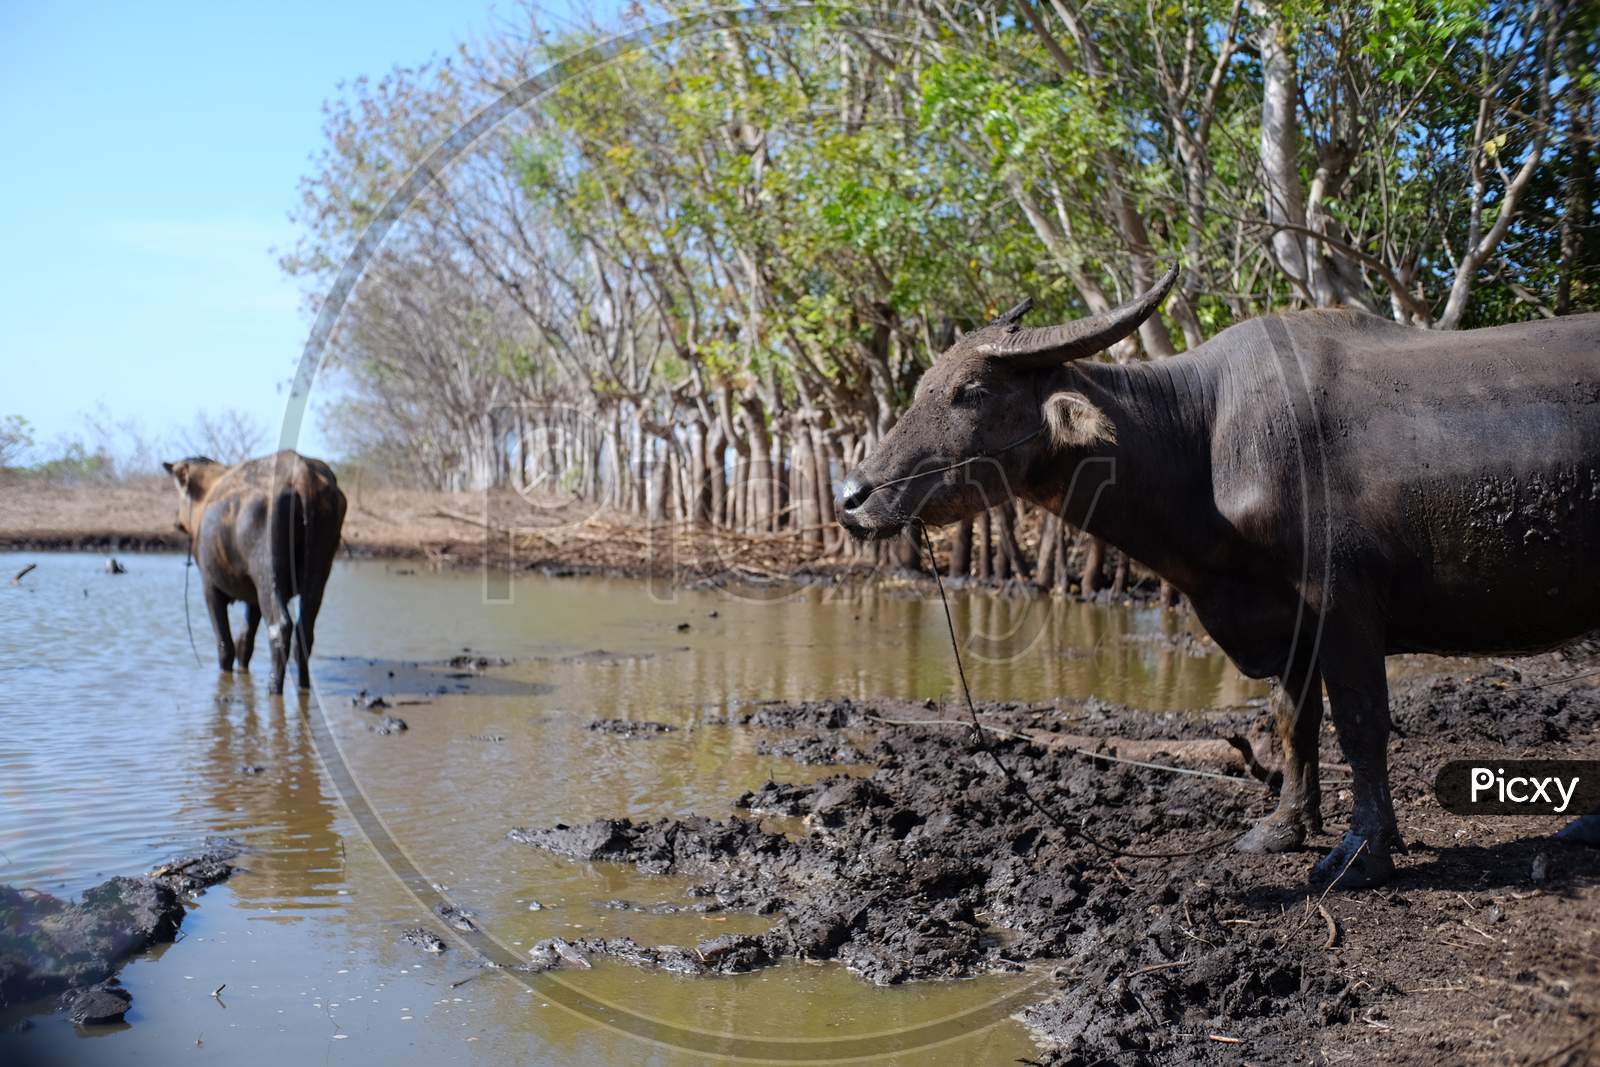 Buffalo in rural mud puddles